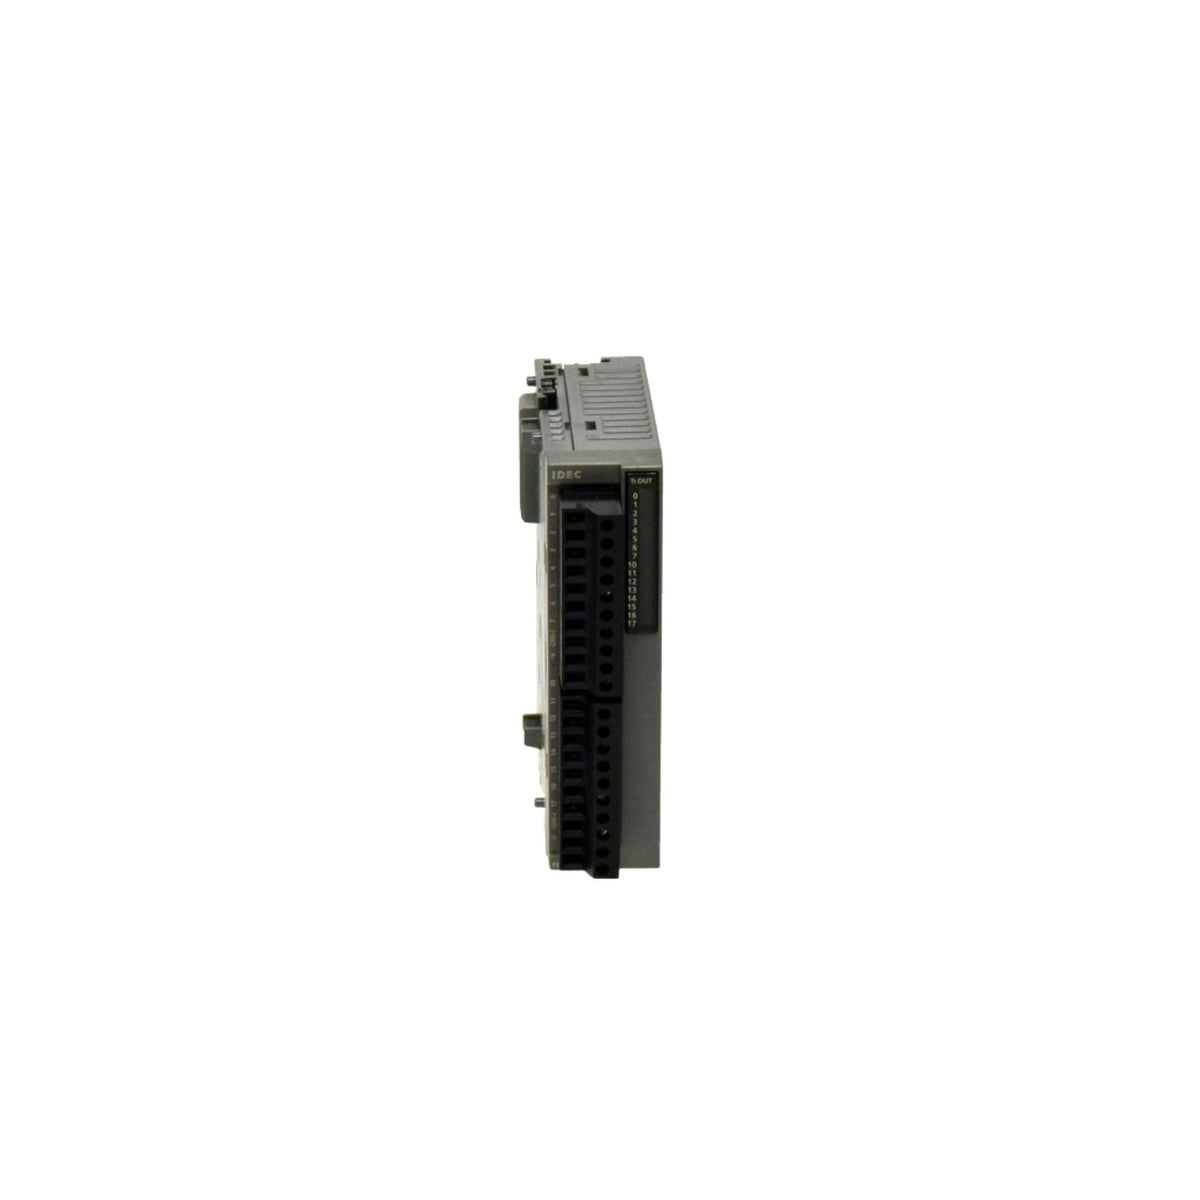 front view of a grey rectangular expansion module with black input ports along the front